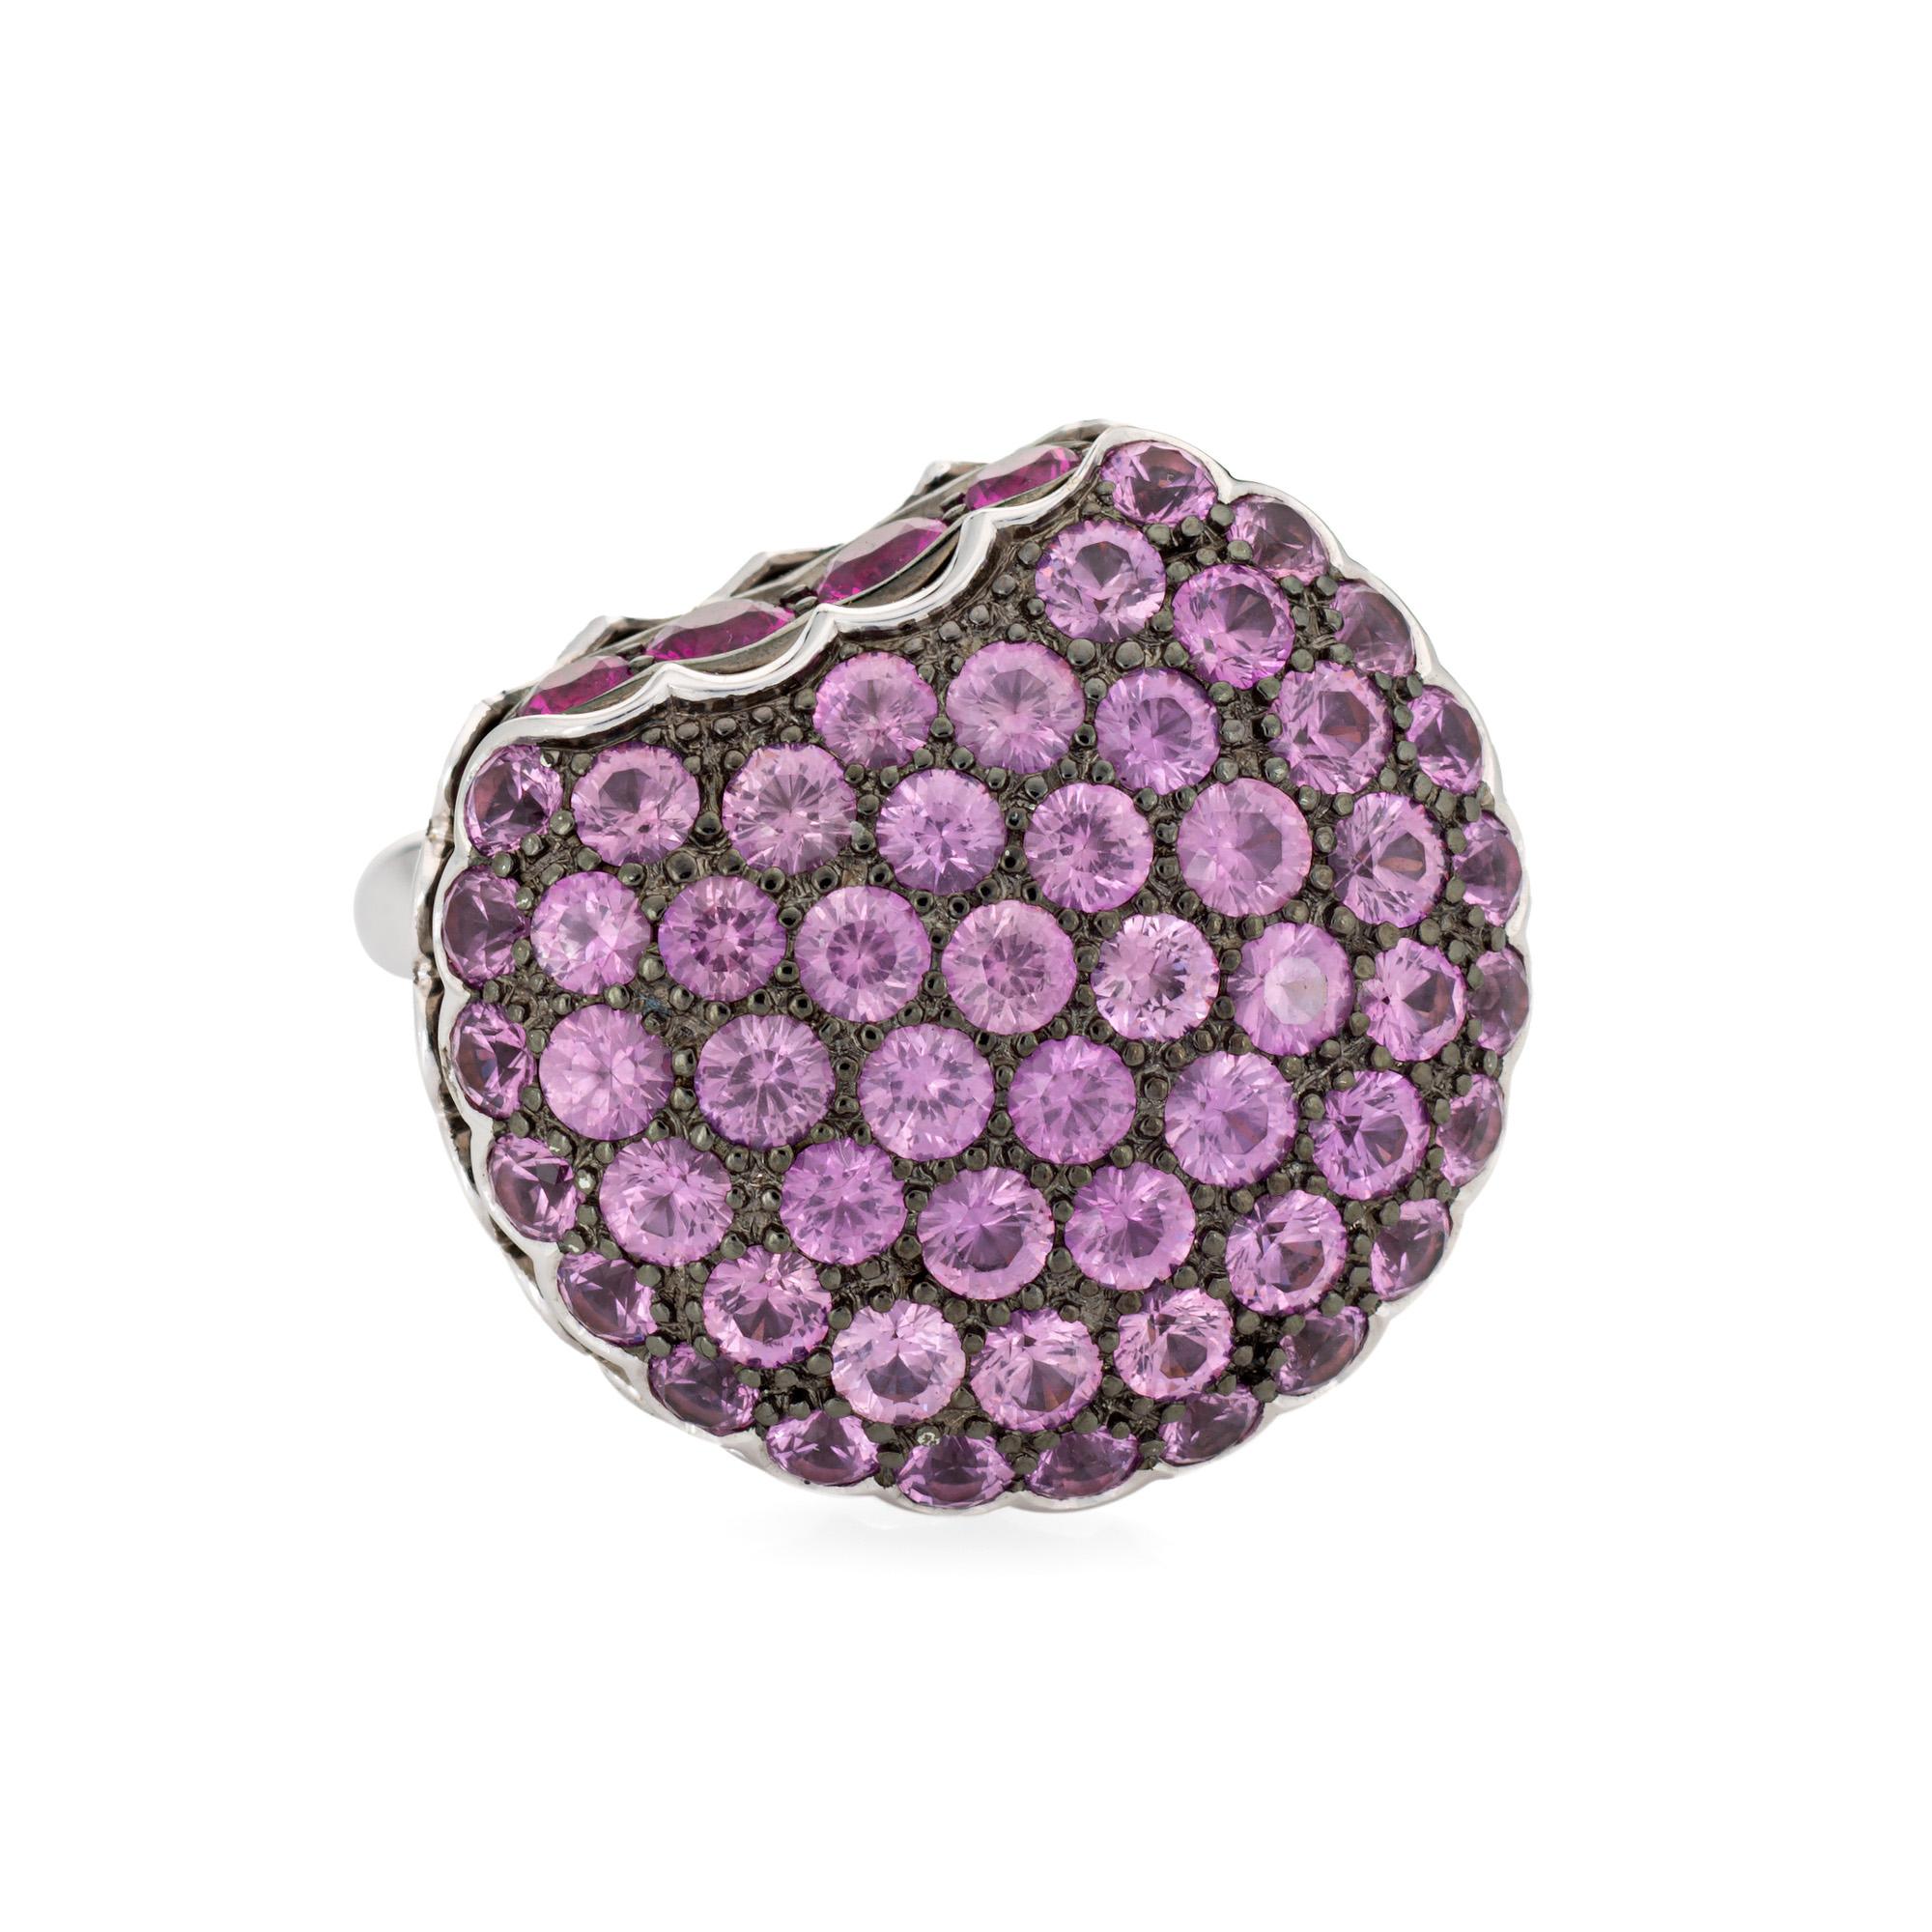 Estate Boucheron Macaroon ring crafted in 18k white gold.  

Pink sapphires are pave set into the mount, measuring approx. 2mm. Rubies measure approx. 2mm to 2.5mm. The gemstones are in very good condition and free of cracks or chips. 

Boucheron